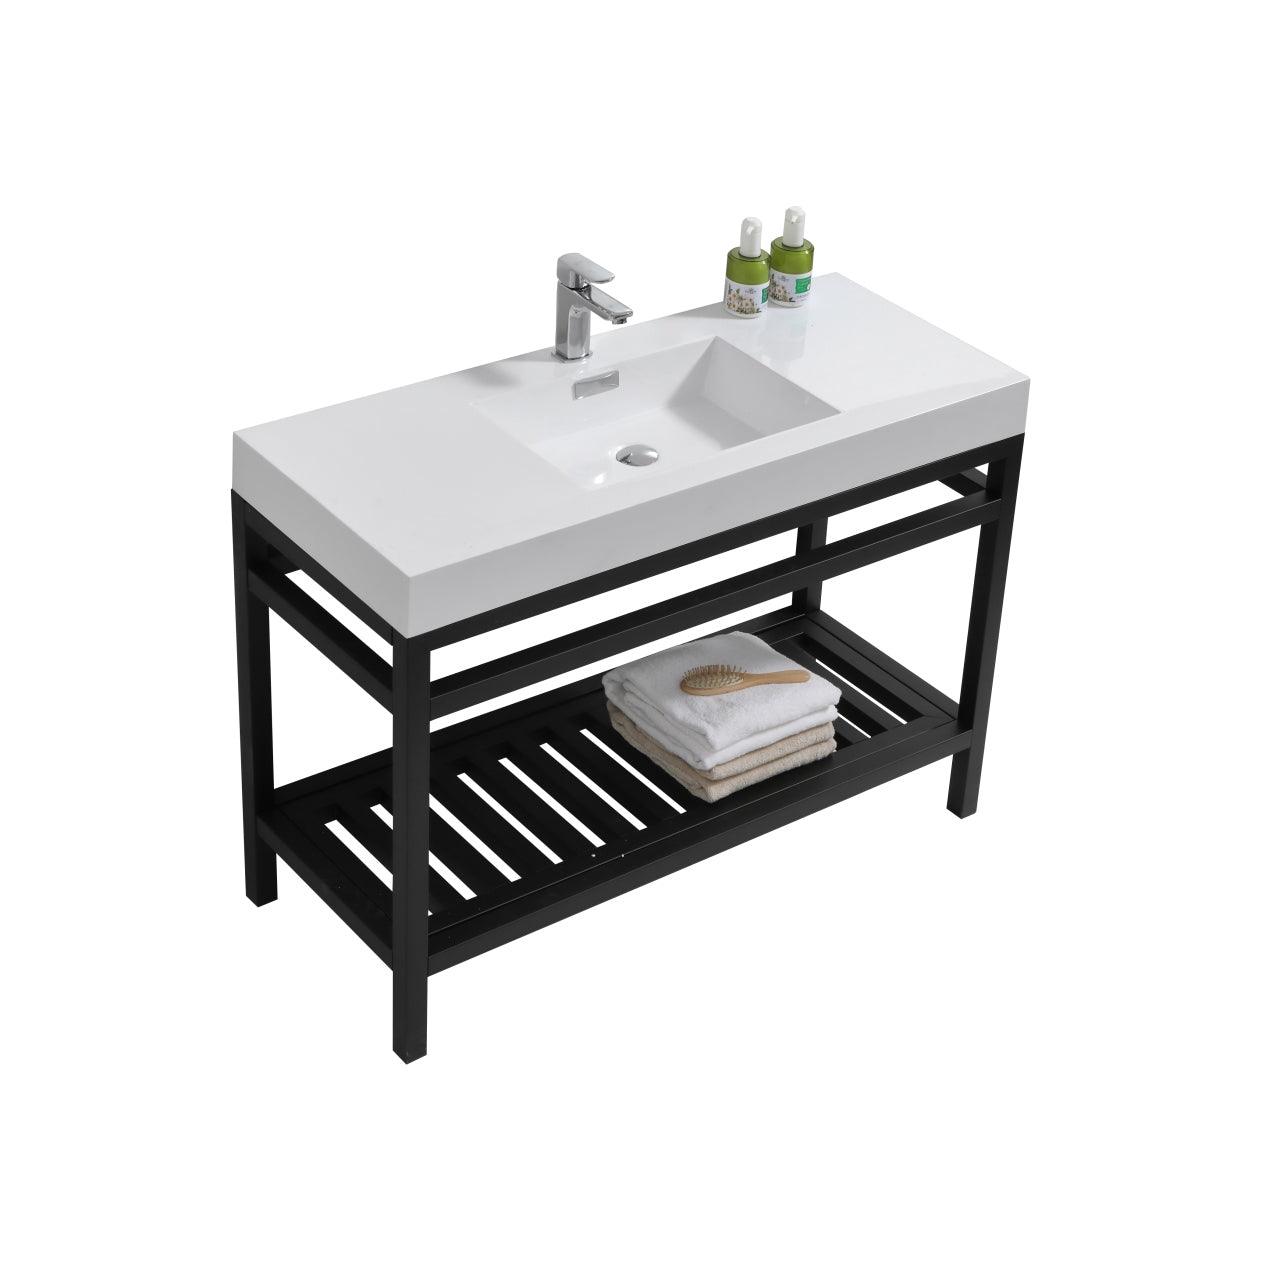 Cisco 48" Stainless Steel Console with Acrylic Sink - Home and Bath Depot